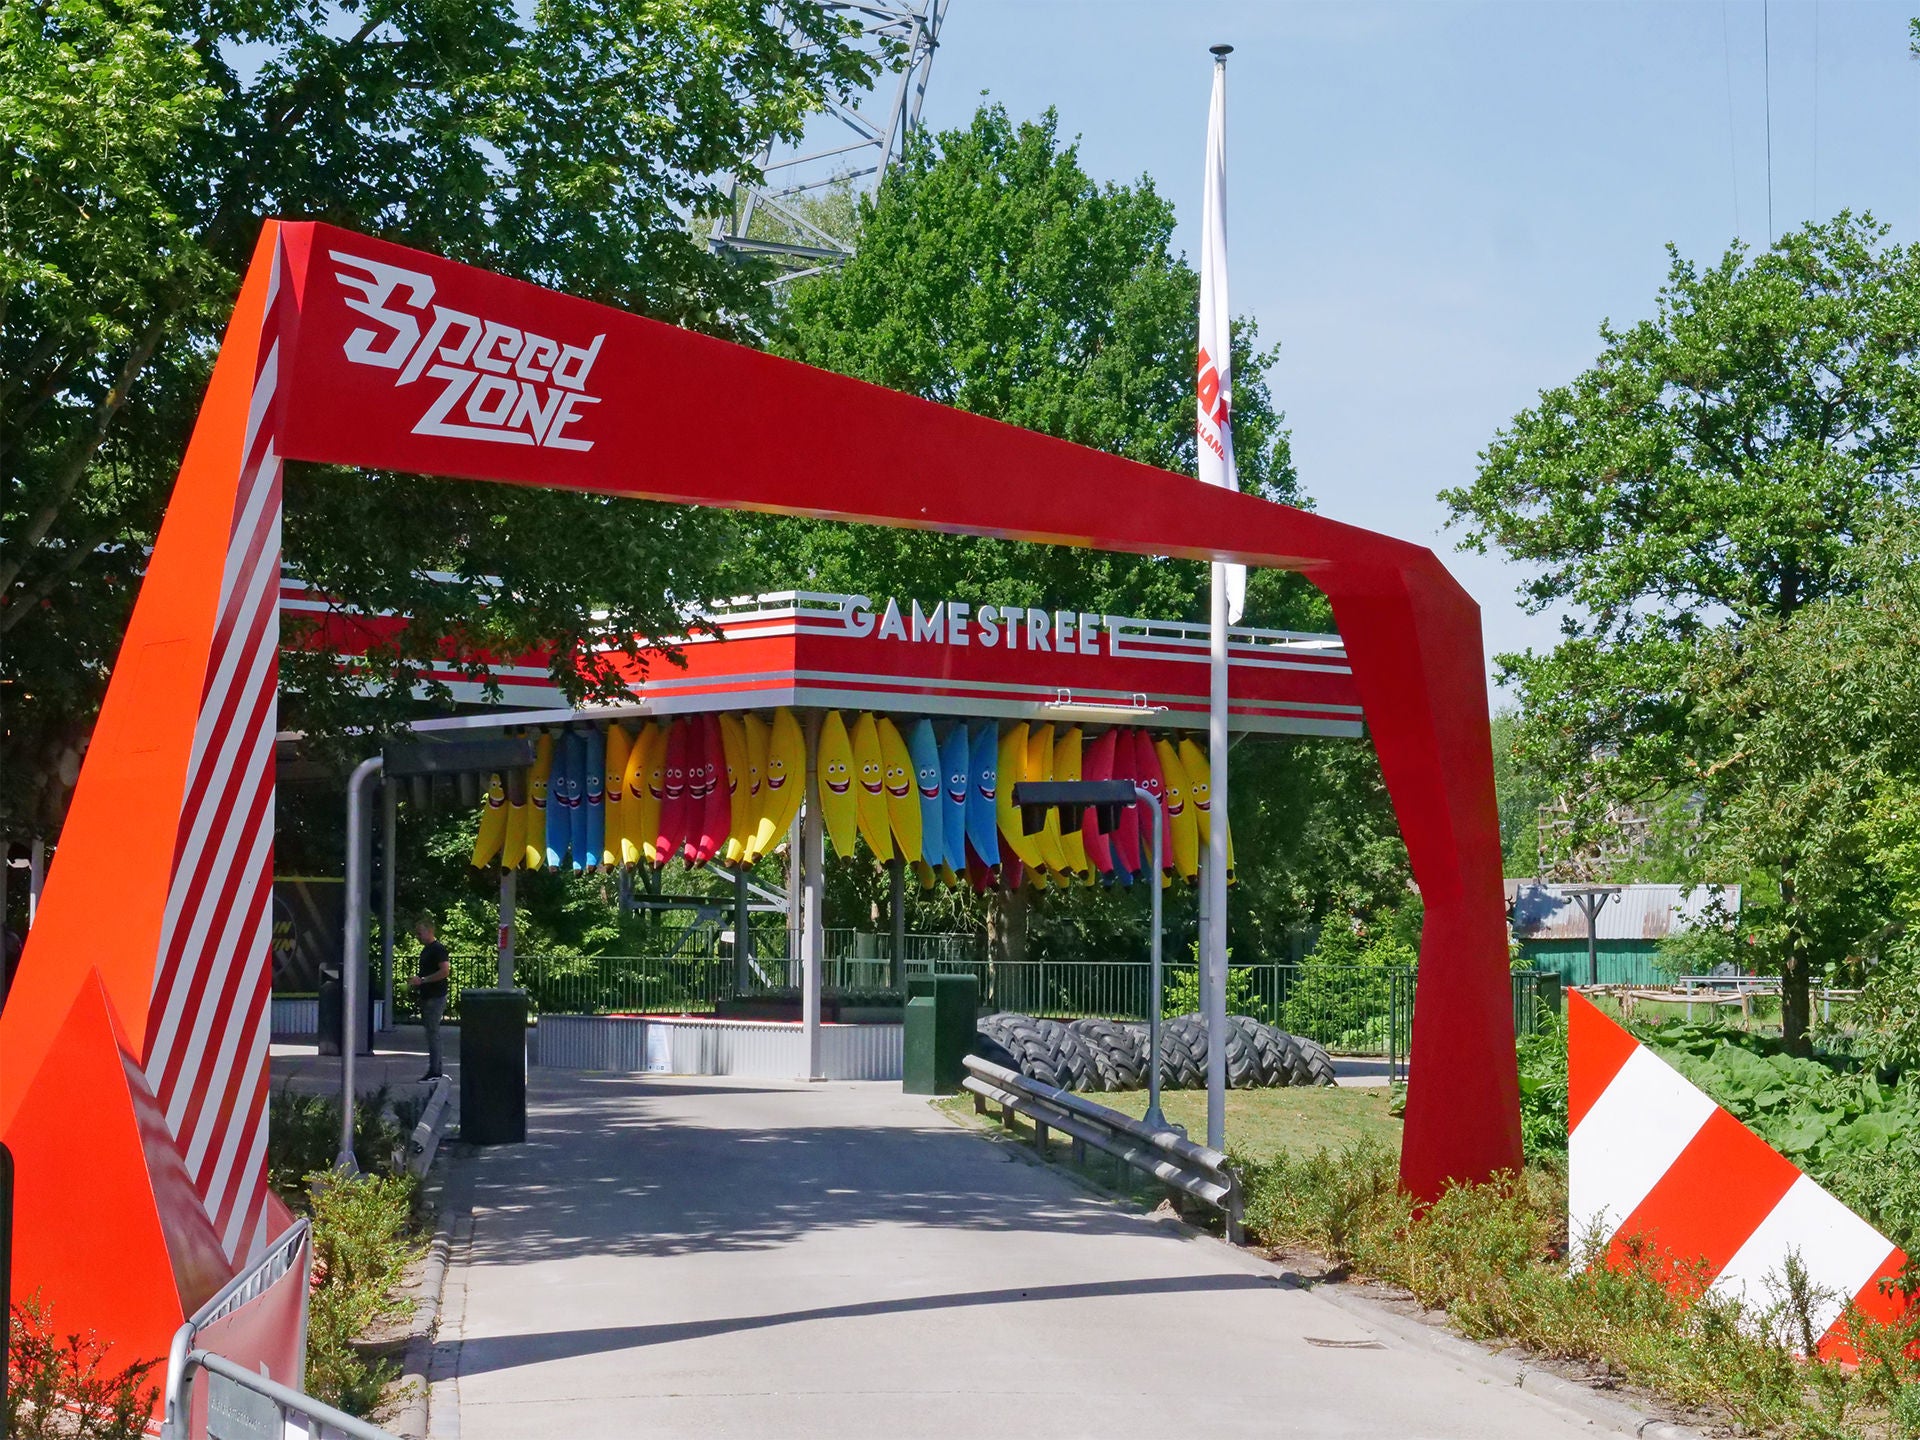 The entrance of the Speed Zone area in Walibi.